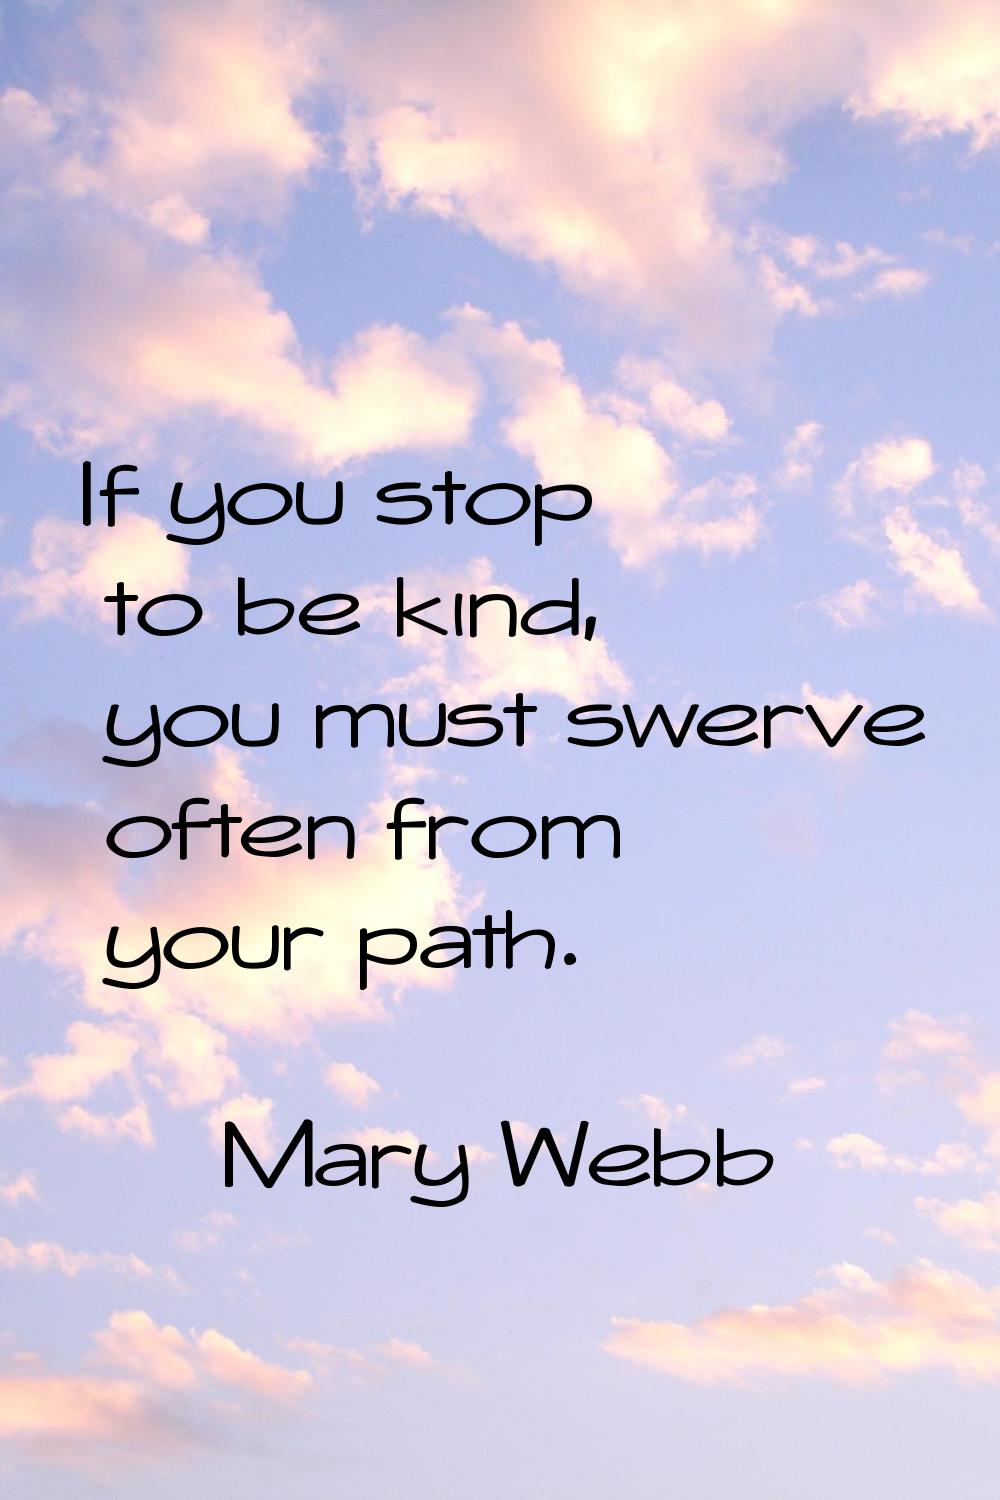 If you stop to be kind, you must swerve often from your path.